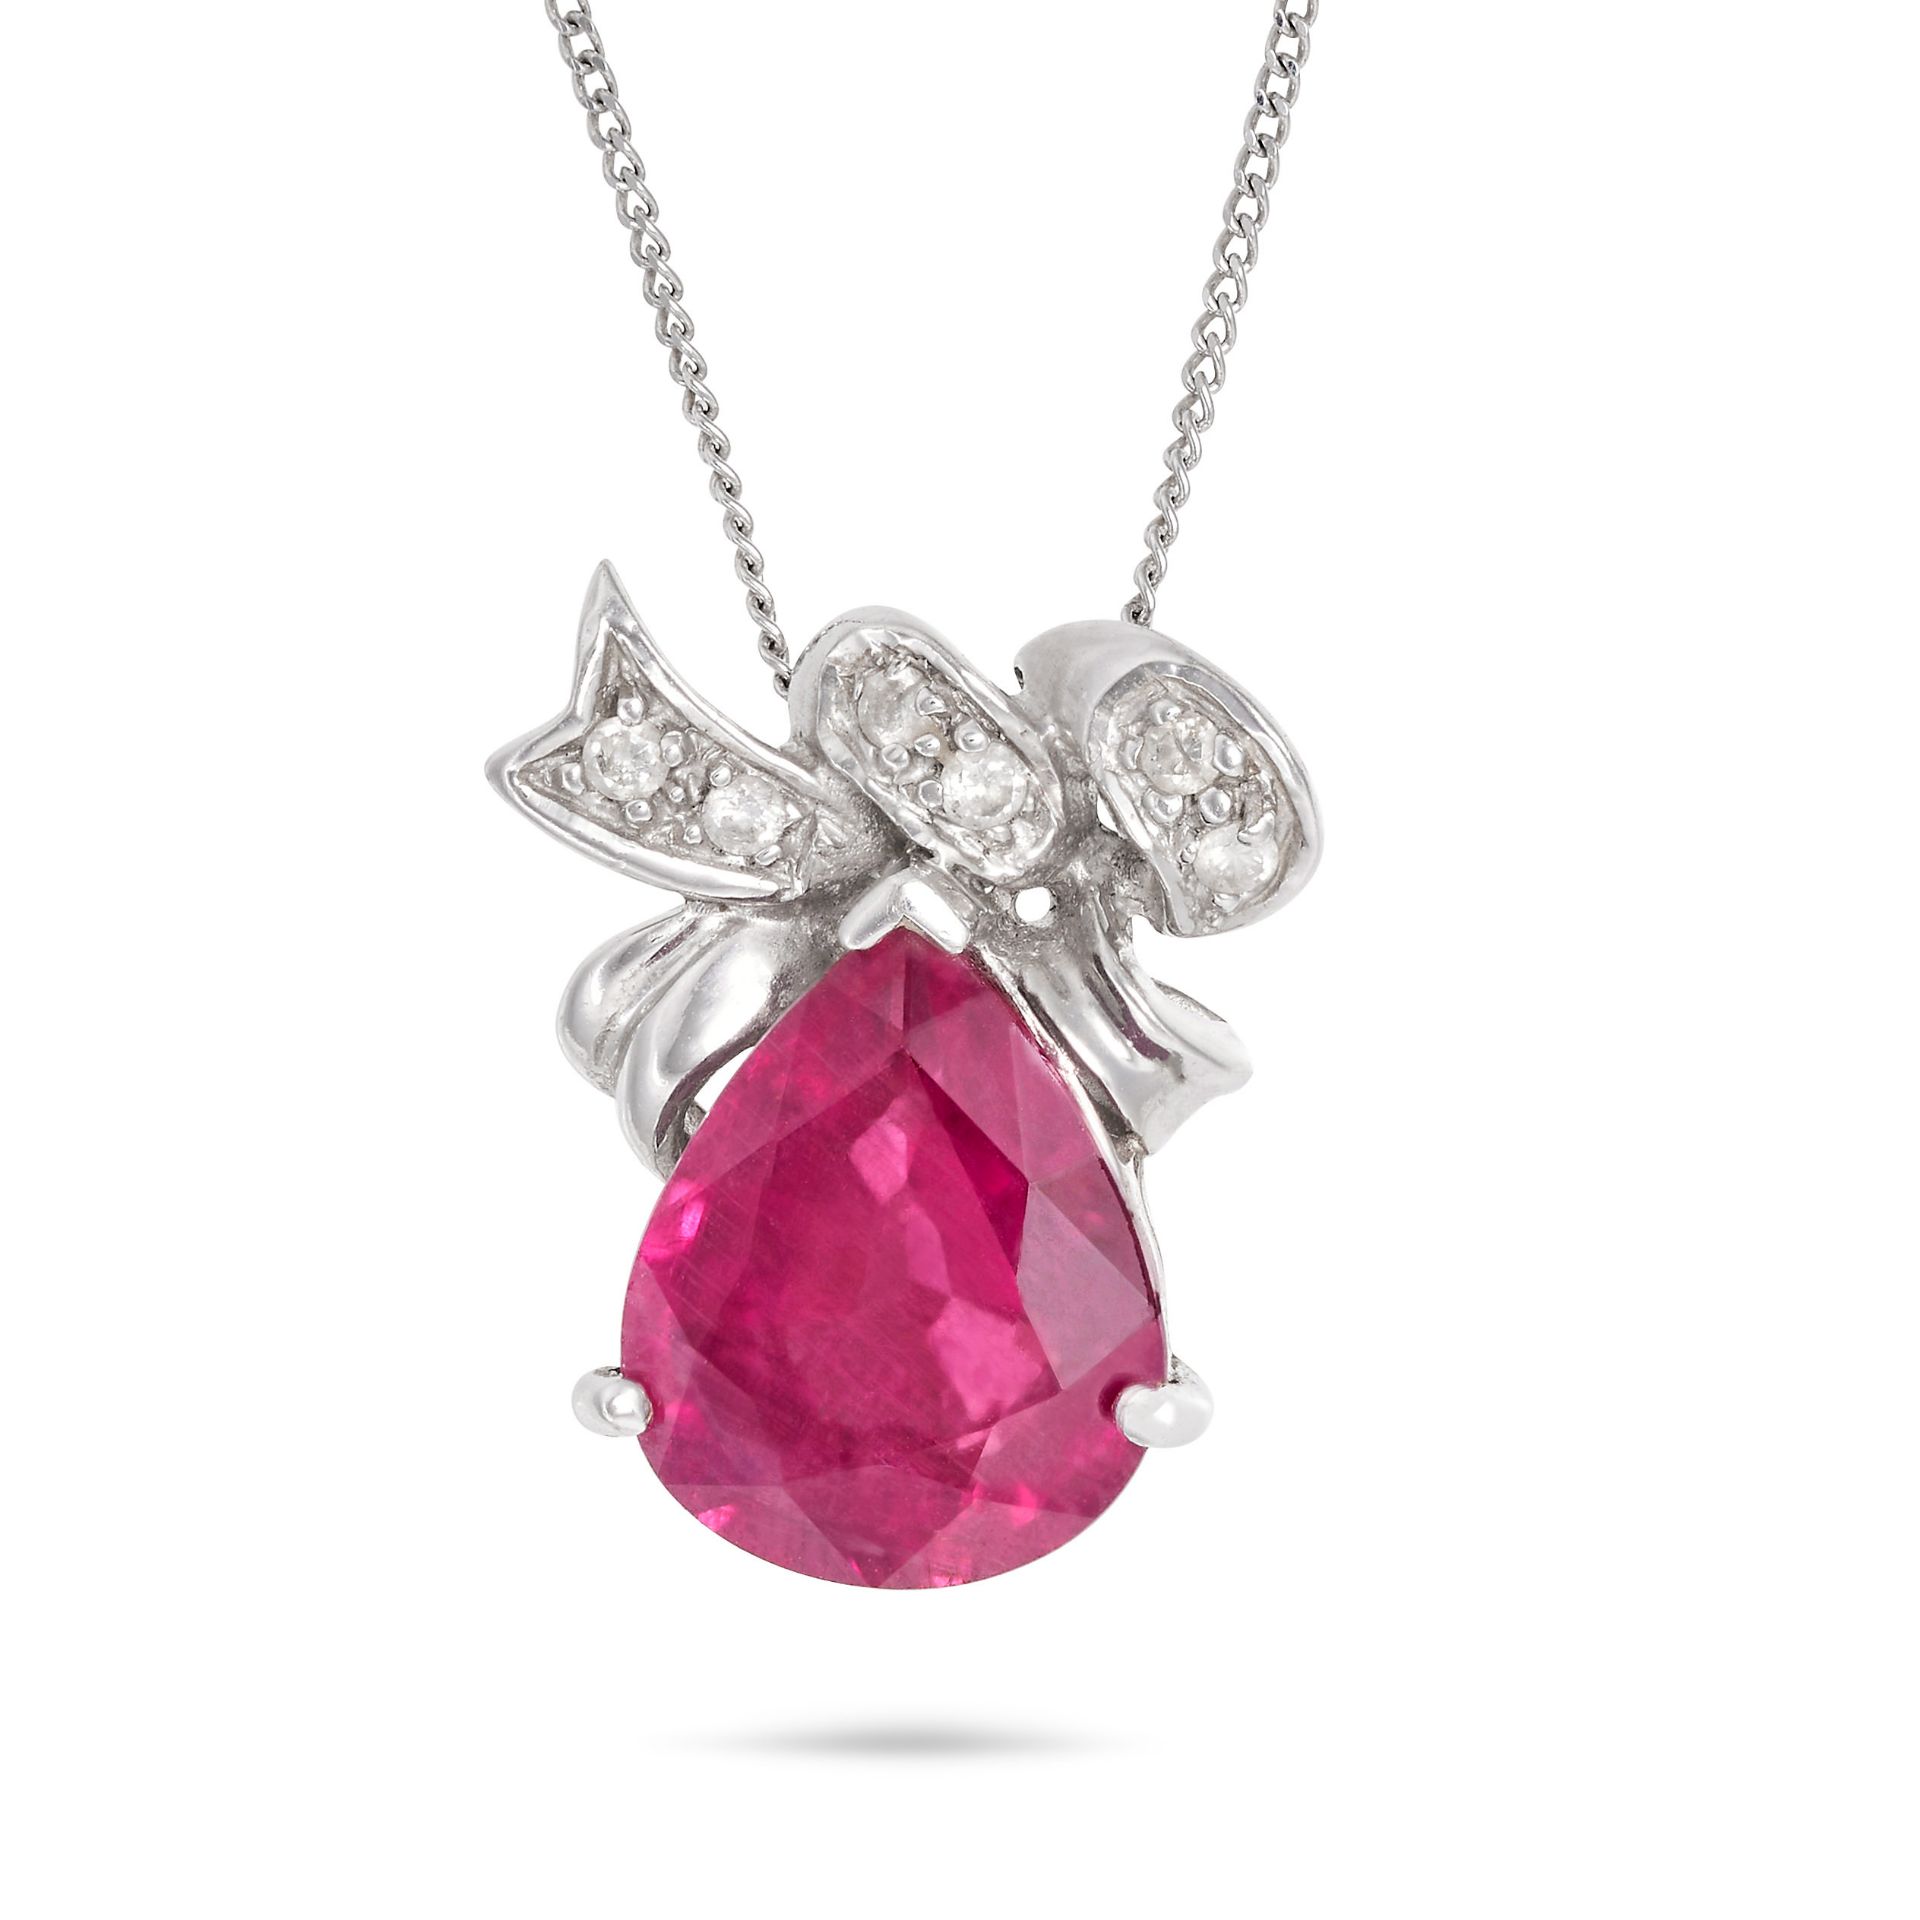 NO RESERVE - A GLASS FILLED RUBY AND DIAMOND PENDANT NECKLACE in 18ct white gold, the pendant des...